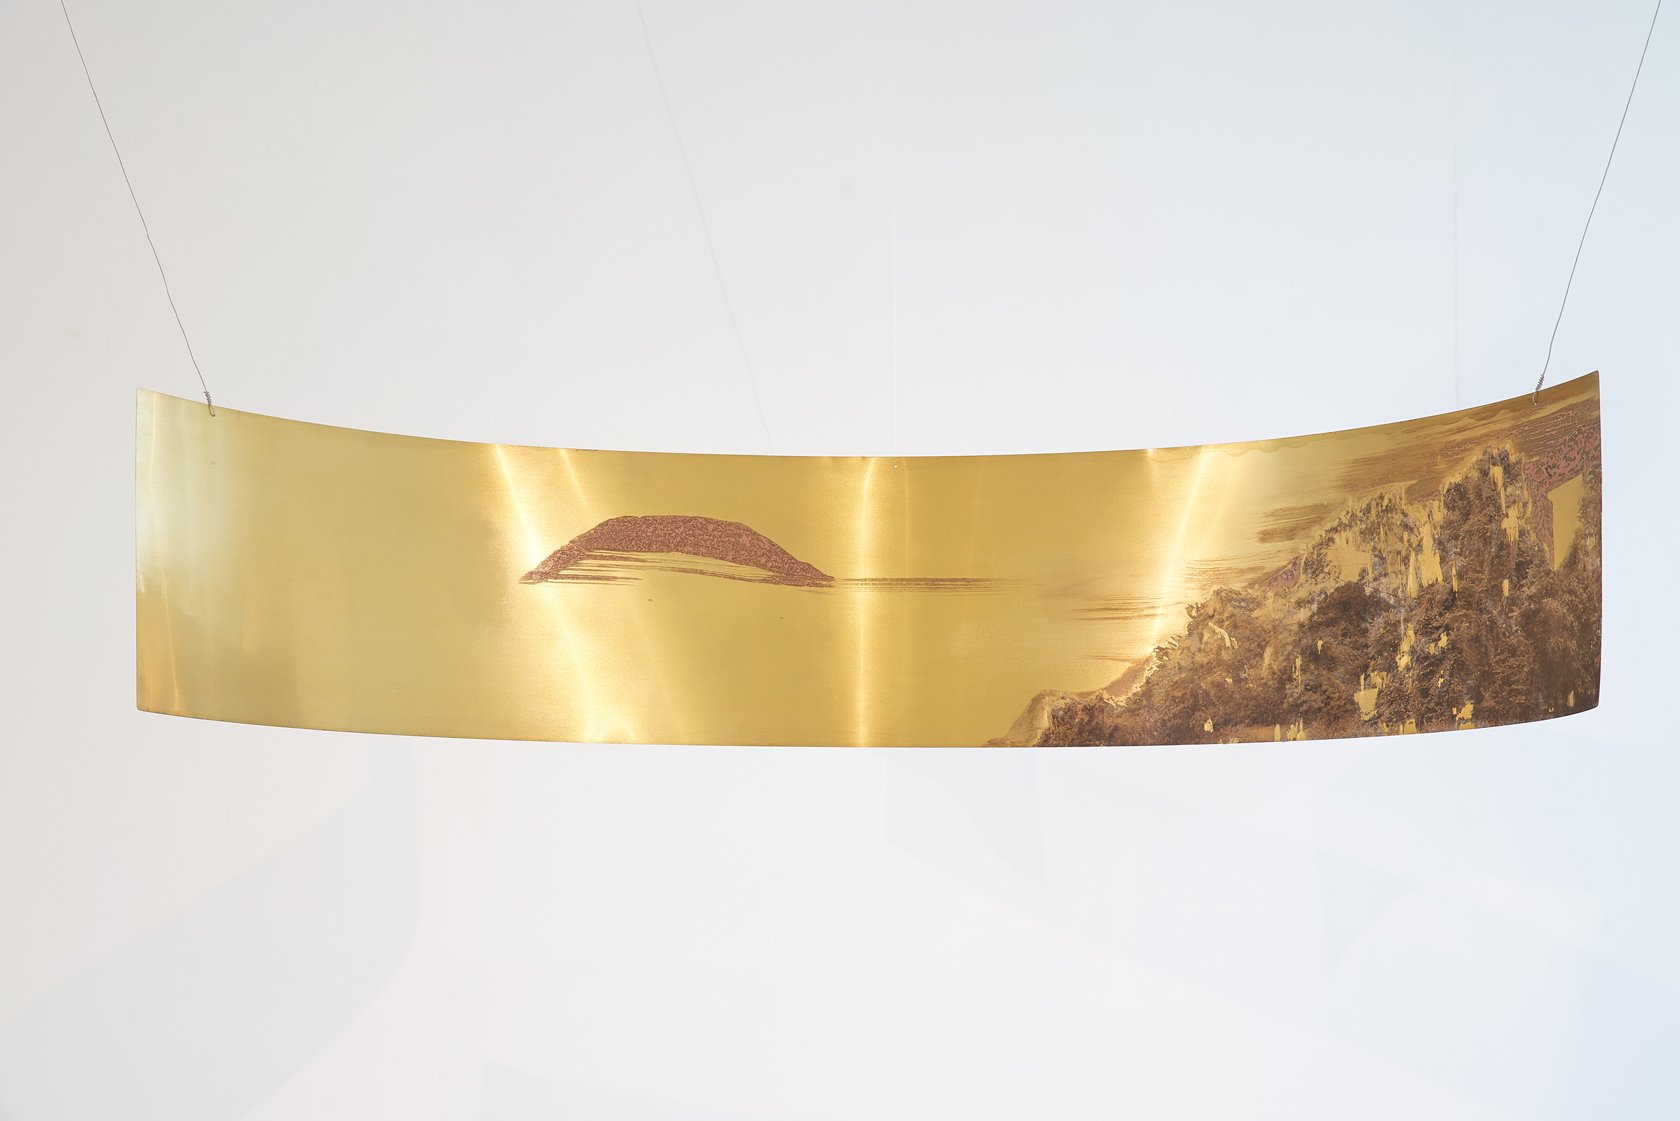  Wyn-Lyn TAN &amp; Zen TEH  Panoramic Fragments X  2022 Corrosives, photographic image print and acrylic on brass H30 x W170 cm 